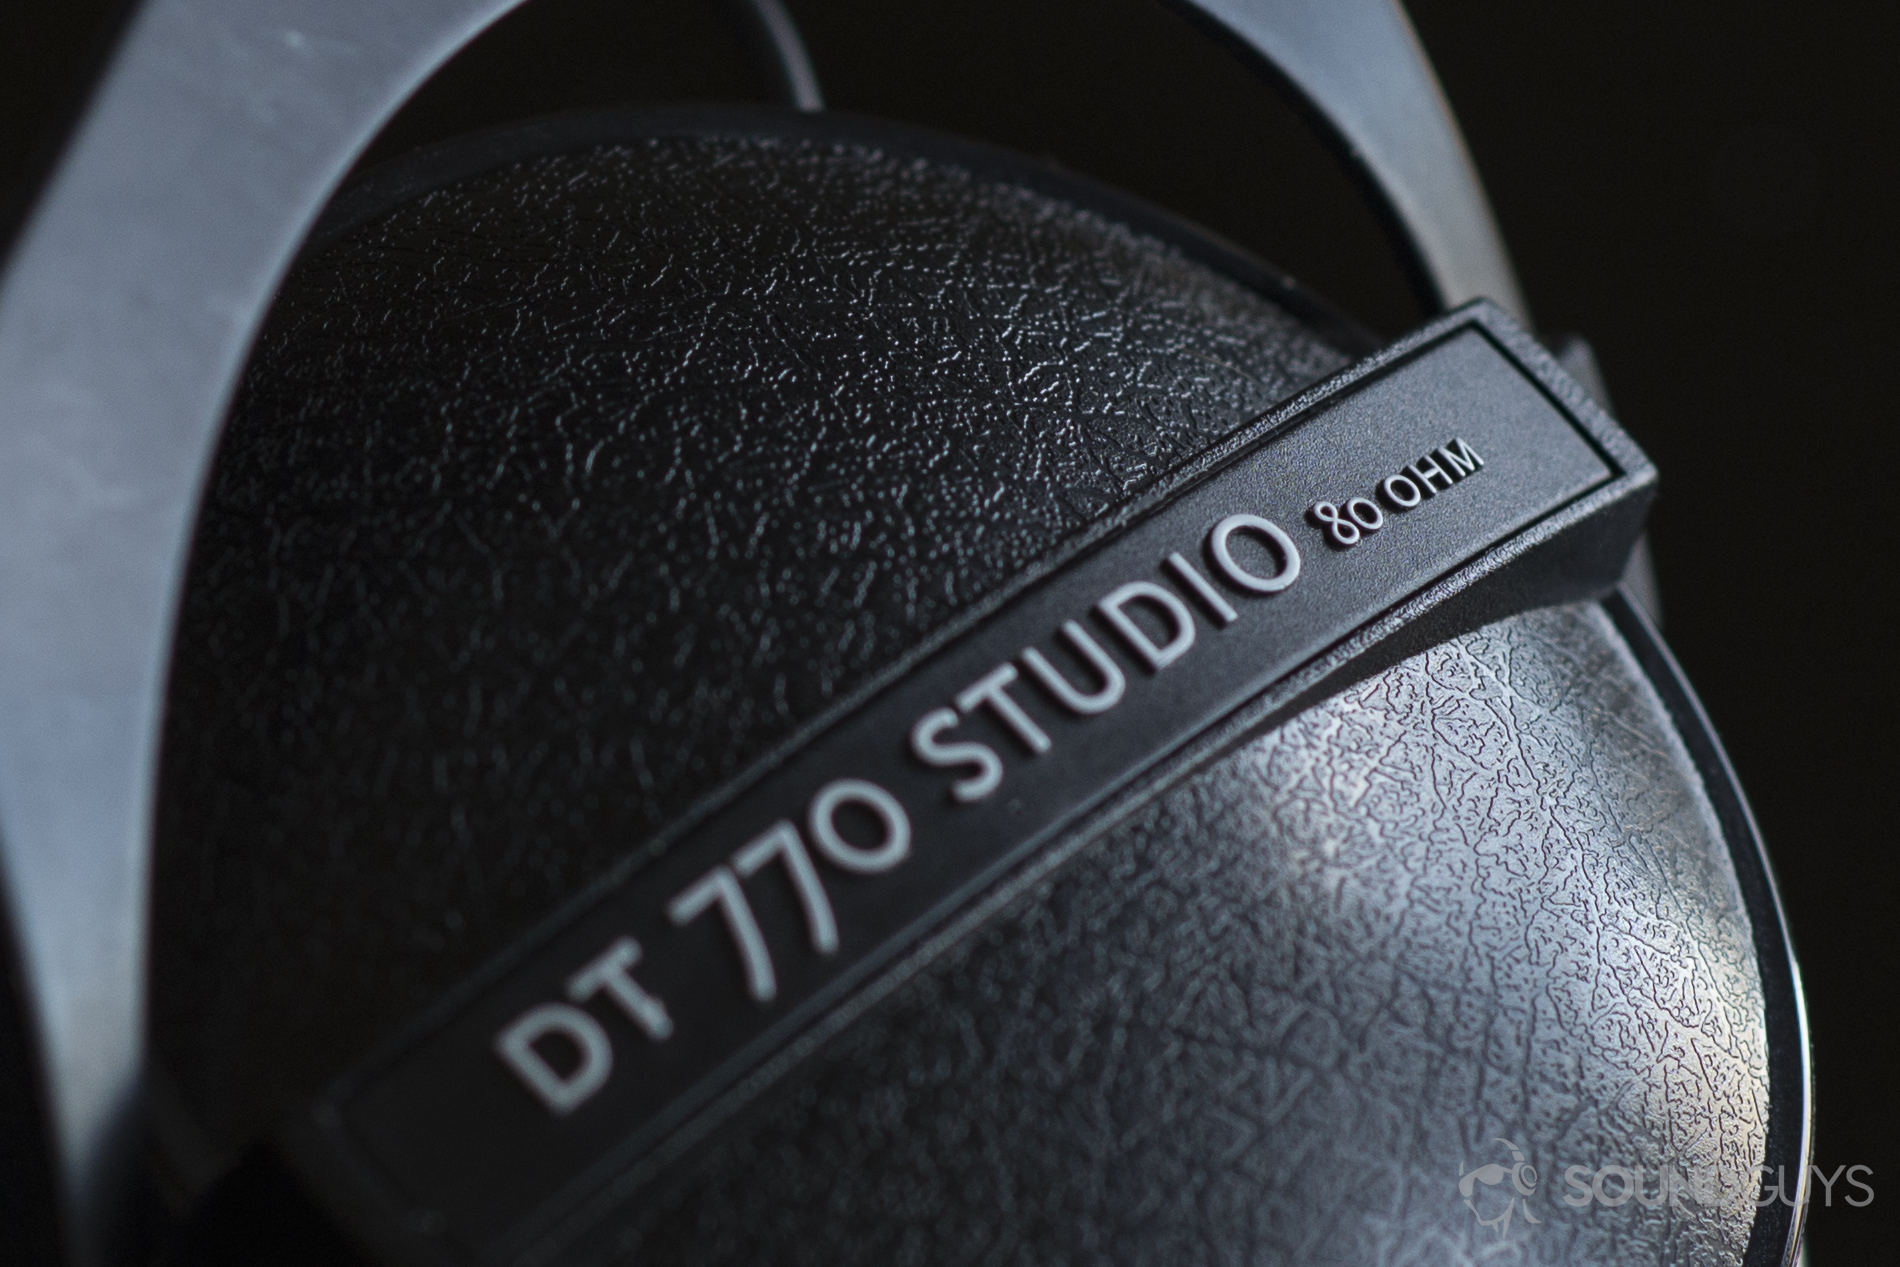 What makes the DT 770 Pro so special? : r/headphones